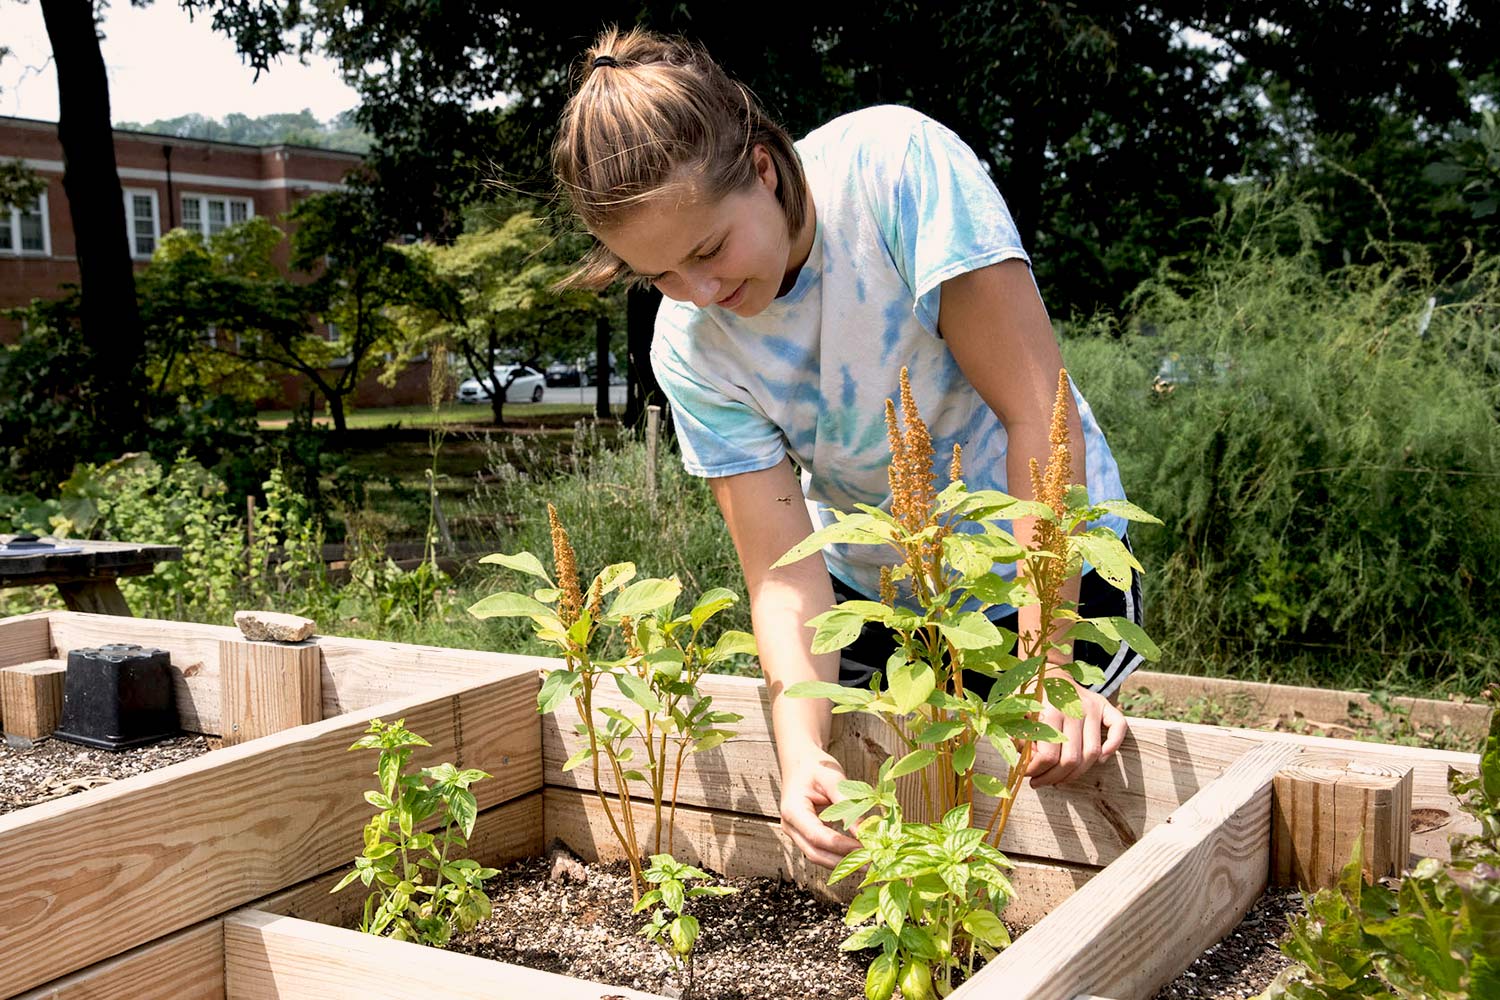 A wheelchair-accessible garden bed, a project completed by students in the UVA School of Architecture’s Freedom By Design community service program, is one of many service projects that have contributed to the functioning of the Community Garden. 